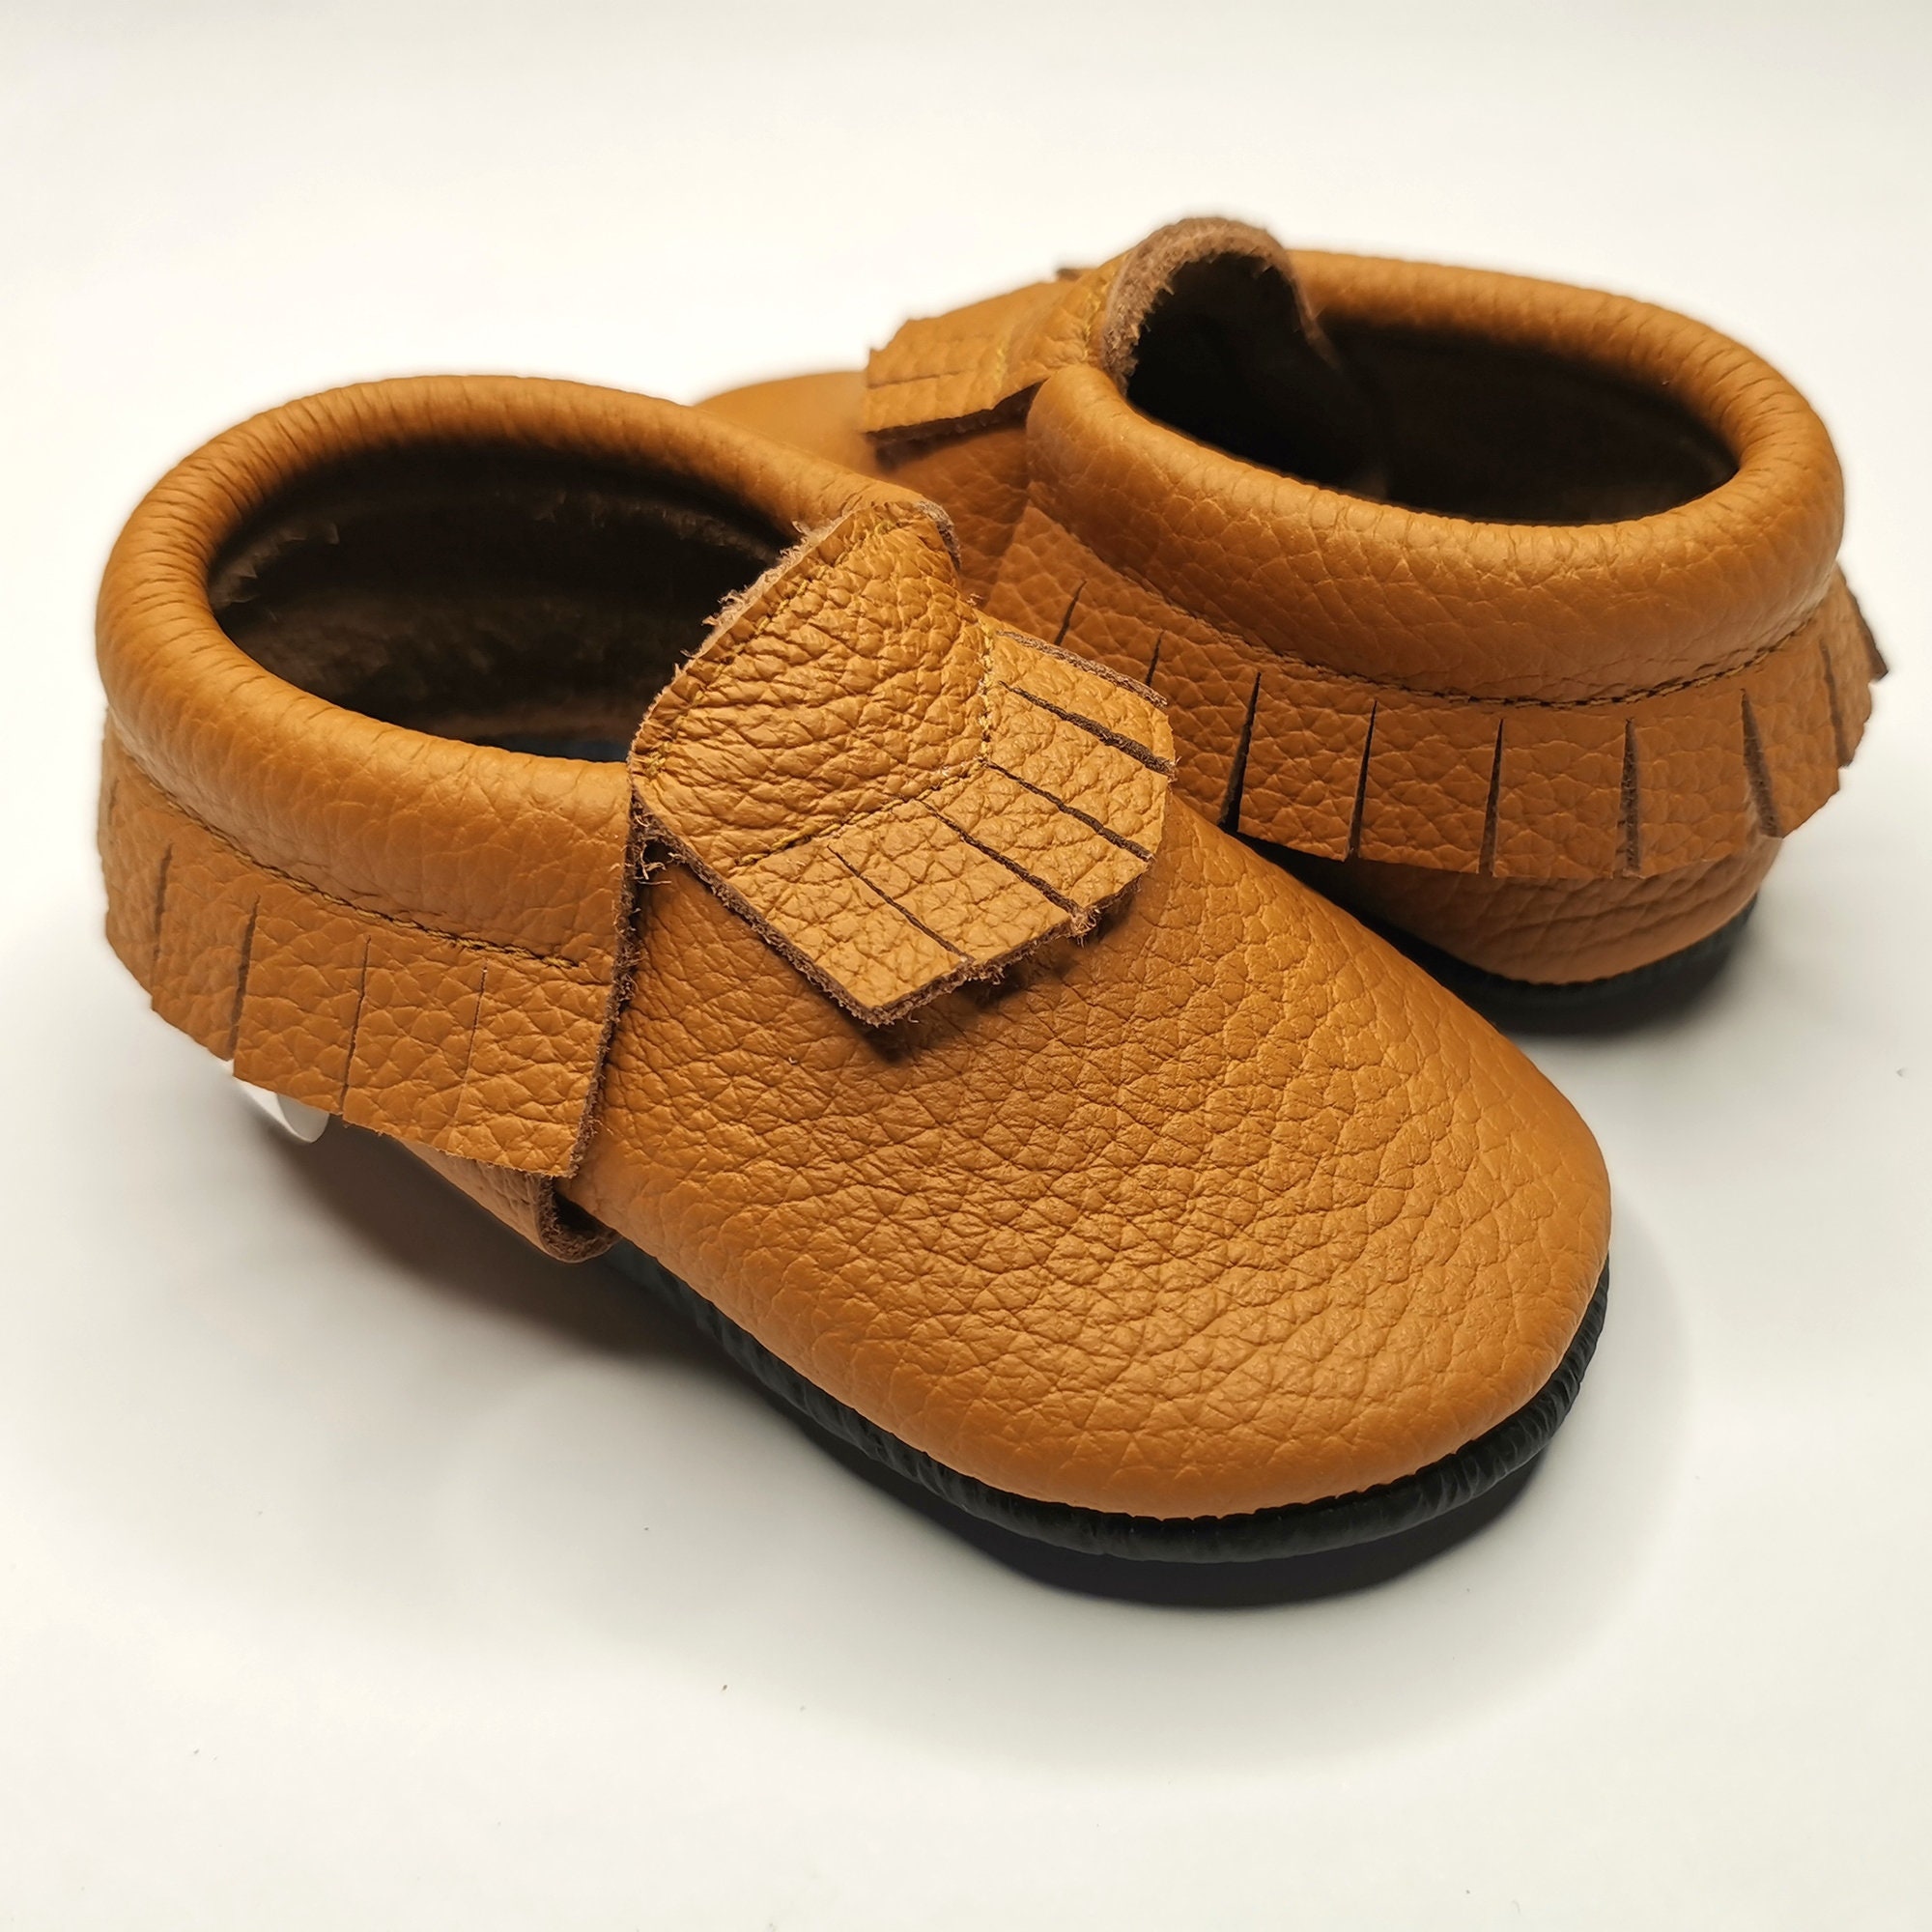 Newborn to Infant Baby/Toddler Girls and Boys Walking Shoes Soft Sole Baby Shoes Moccasin Leather Baby Moccasins Girls and Boys w/Suede Sole 